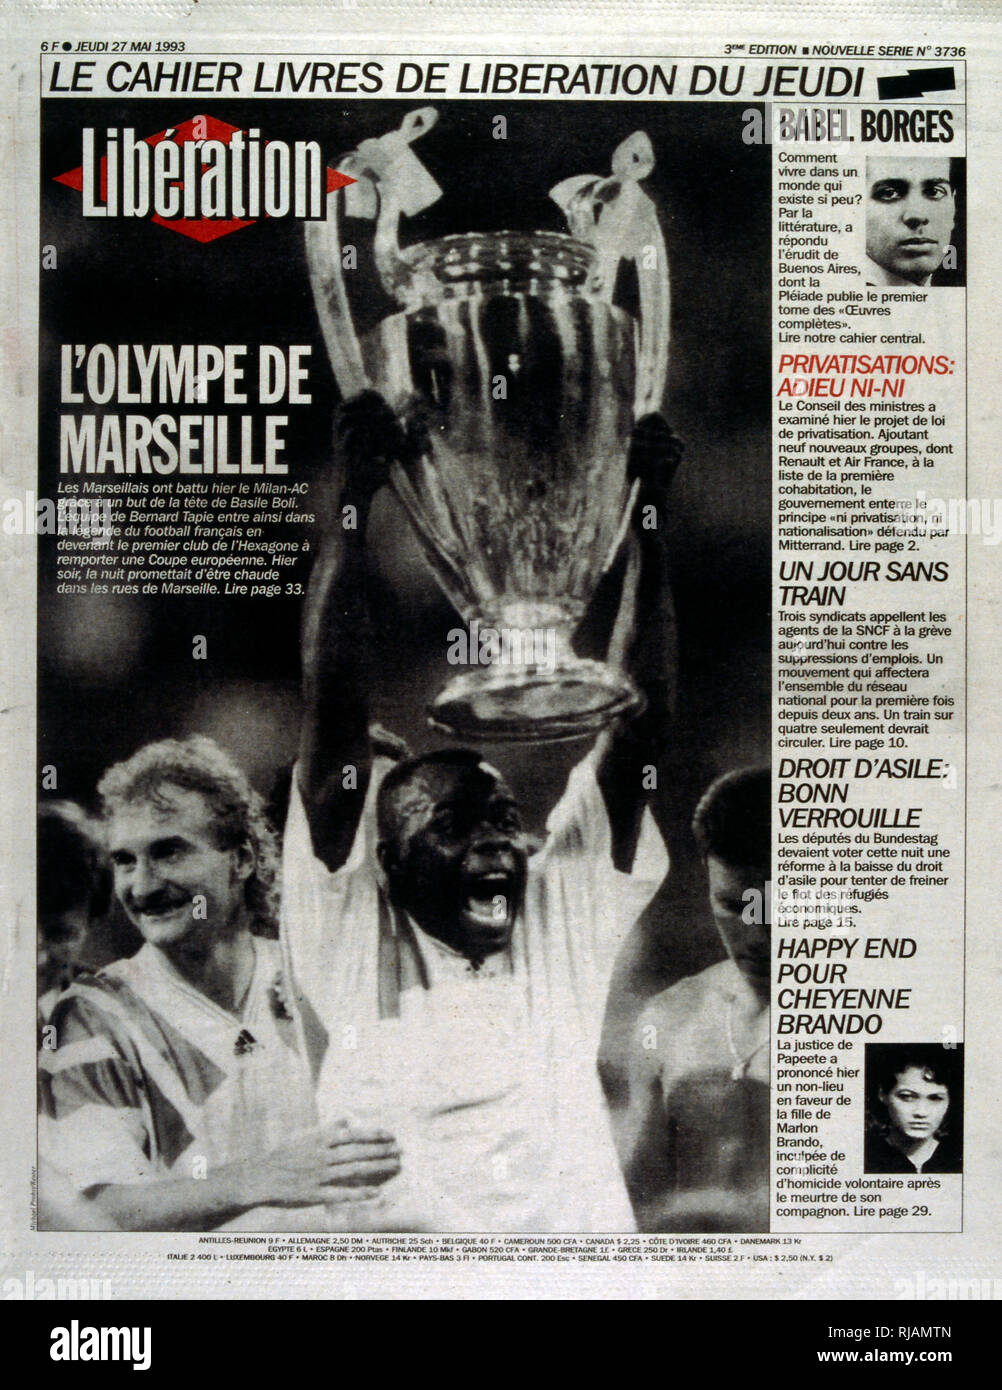 French publication 'Liberation' reporting the Marseilles Football club winning the UEFA Champions League in 1993. The highlight of the Marseilles football club's history was winning the new format UEFA Champions League in 1993. Basile Boli scored the only goal against Italy's Milan in the final held in Munich's Olympic Stadium. This triumph, however, was followed by a decade of decline. In 1994, due to financial irregularities and a match fixing scandal involving then president Bernard Tapie Stock Photo